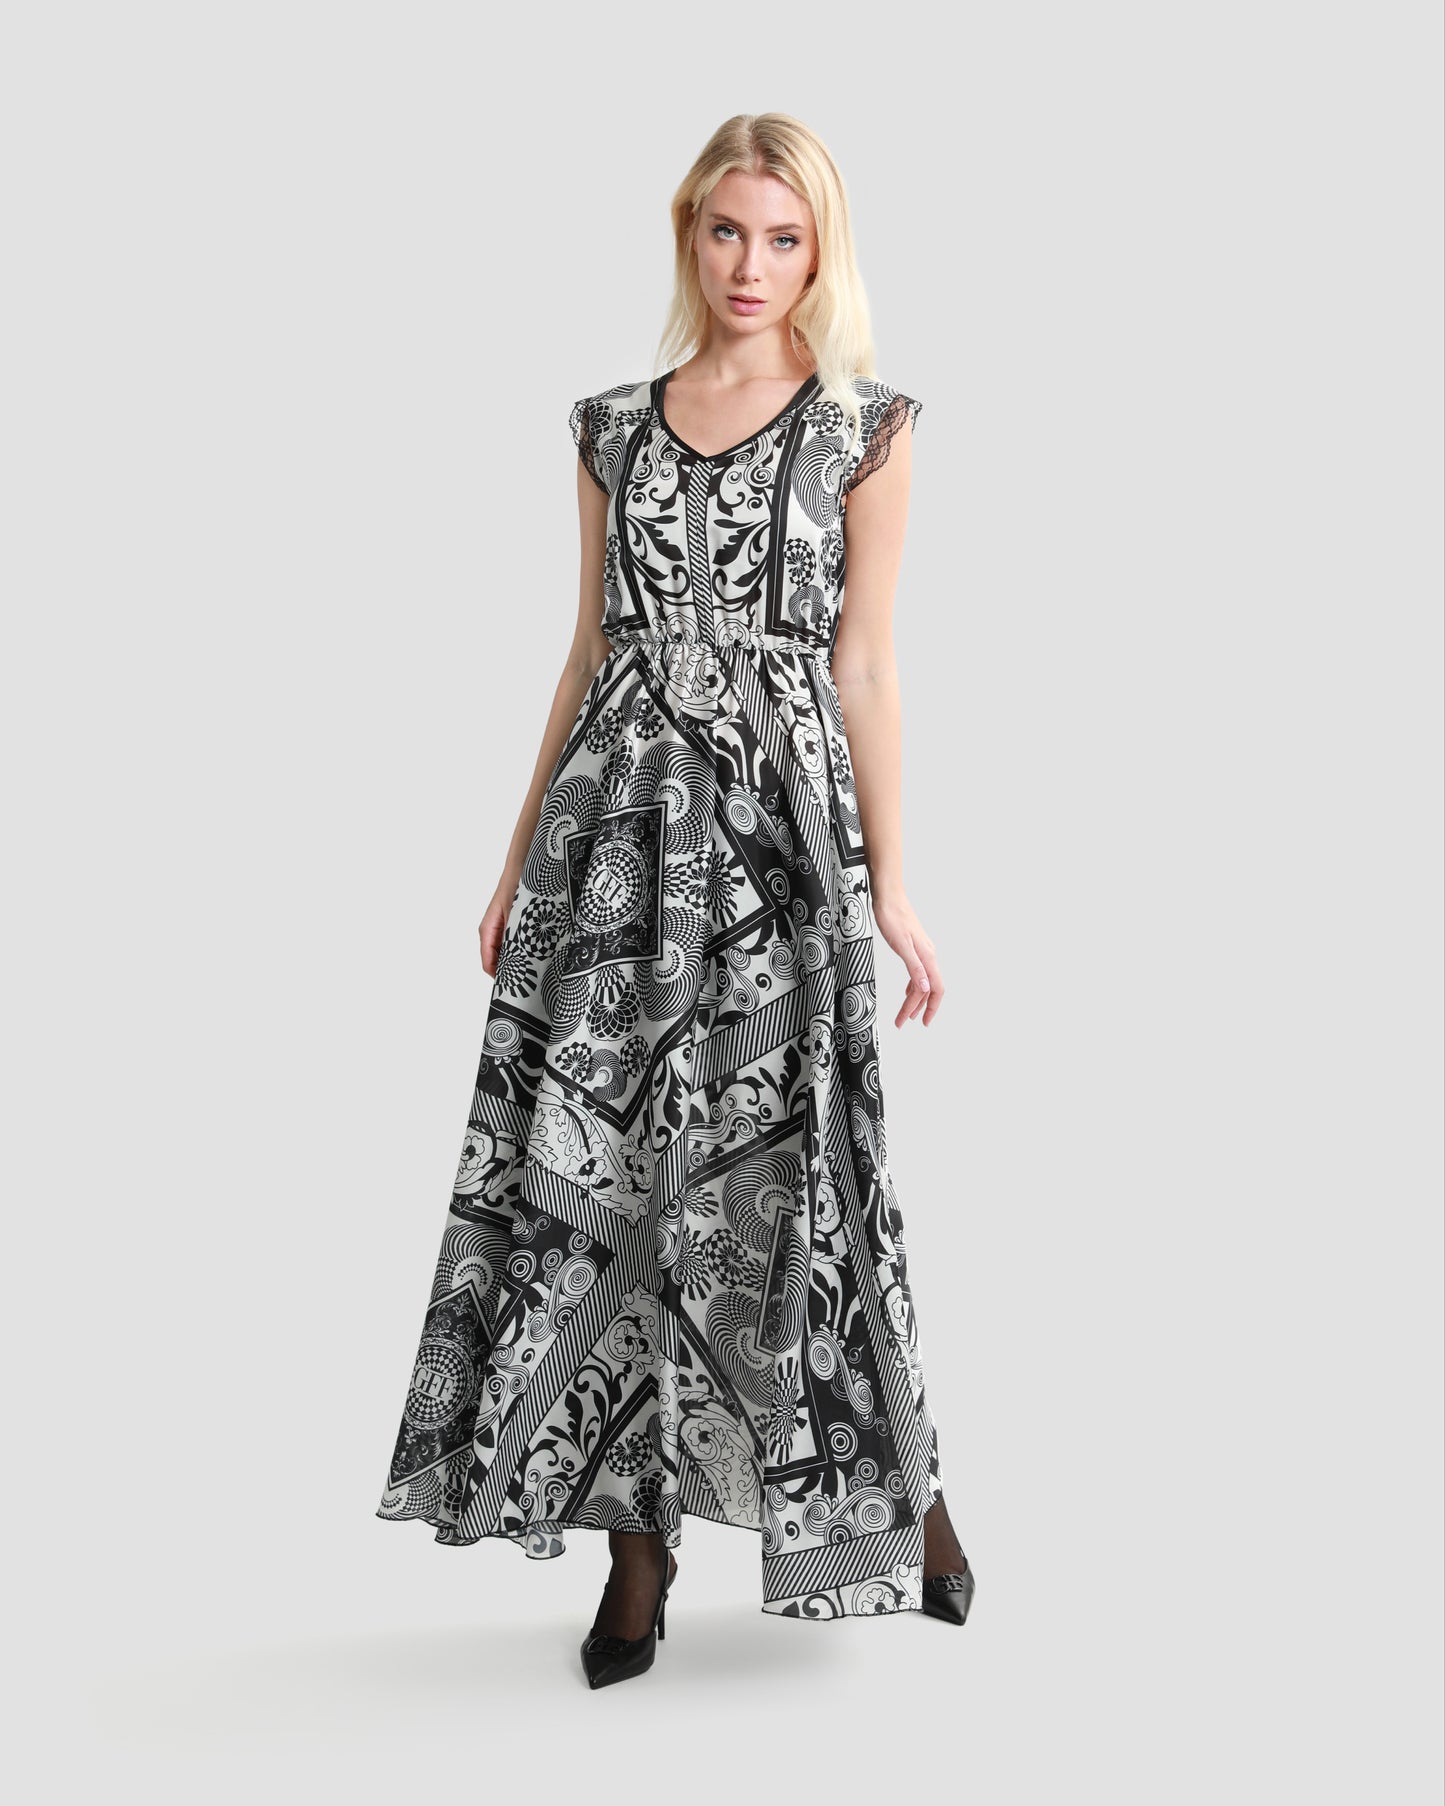 Lace Trimmed Graphic Printed Dress